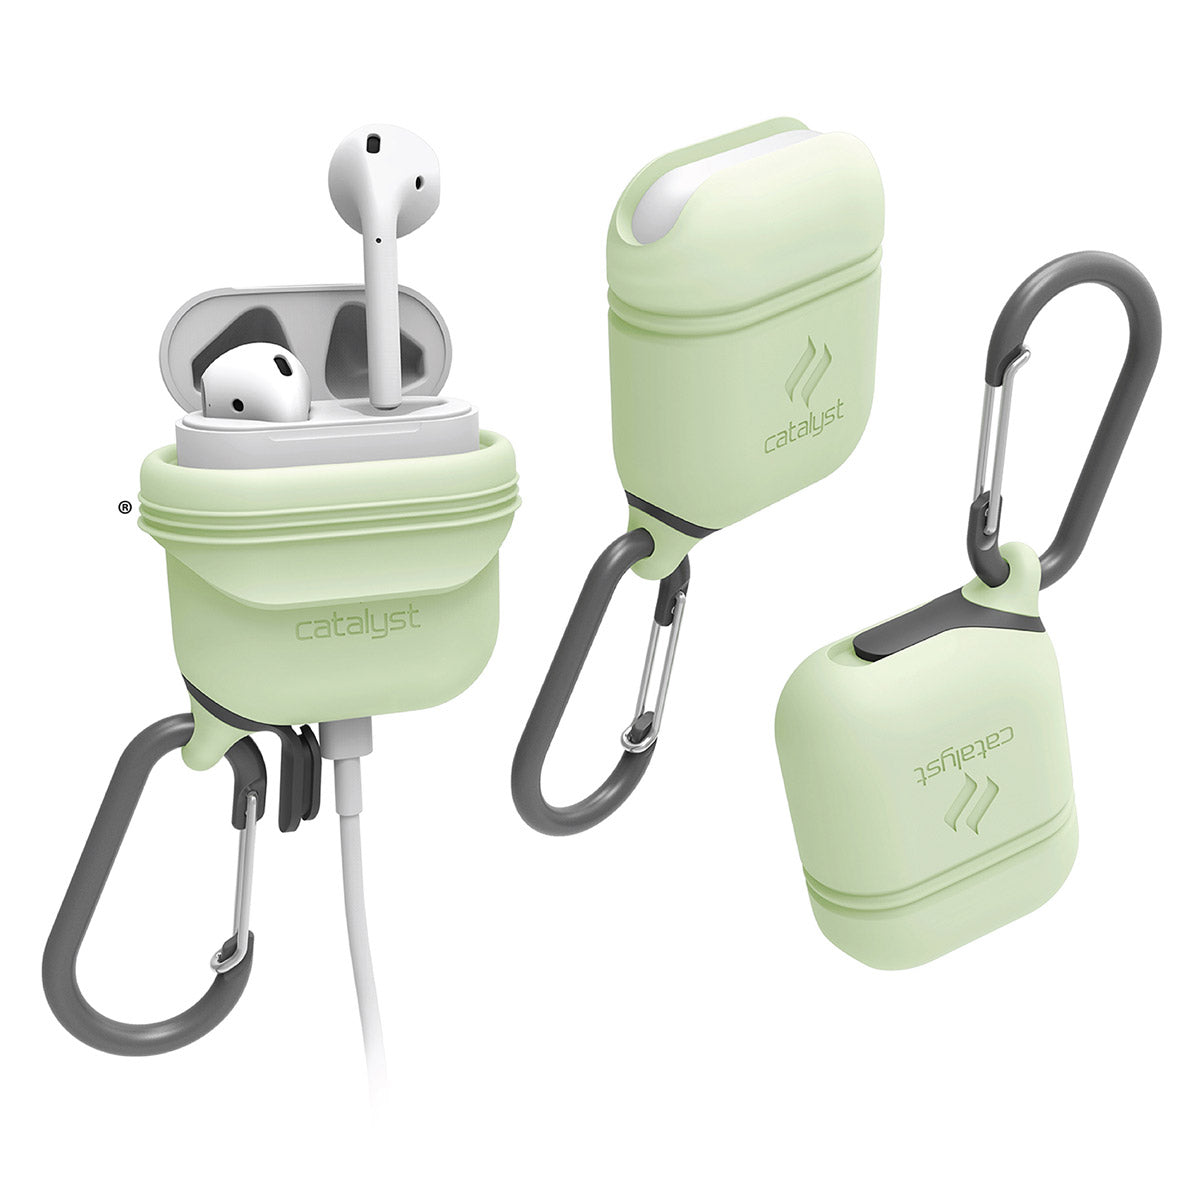 Catalyst Waterproof Case for Airpods Gen 1 & 2 special edition + carabiner showing 3 airpods cases with carabiner attached